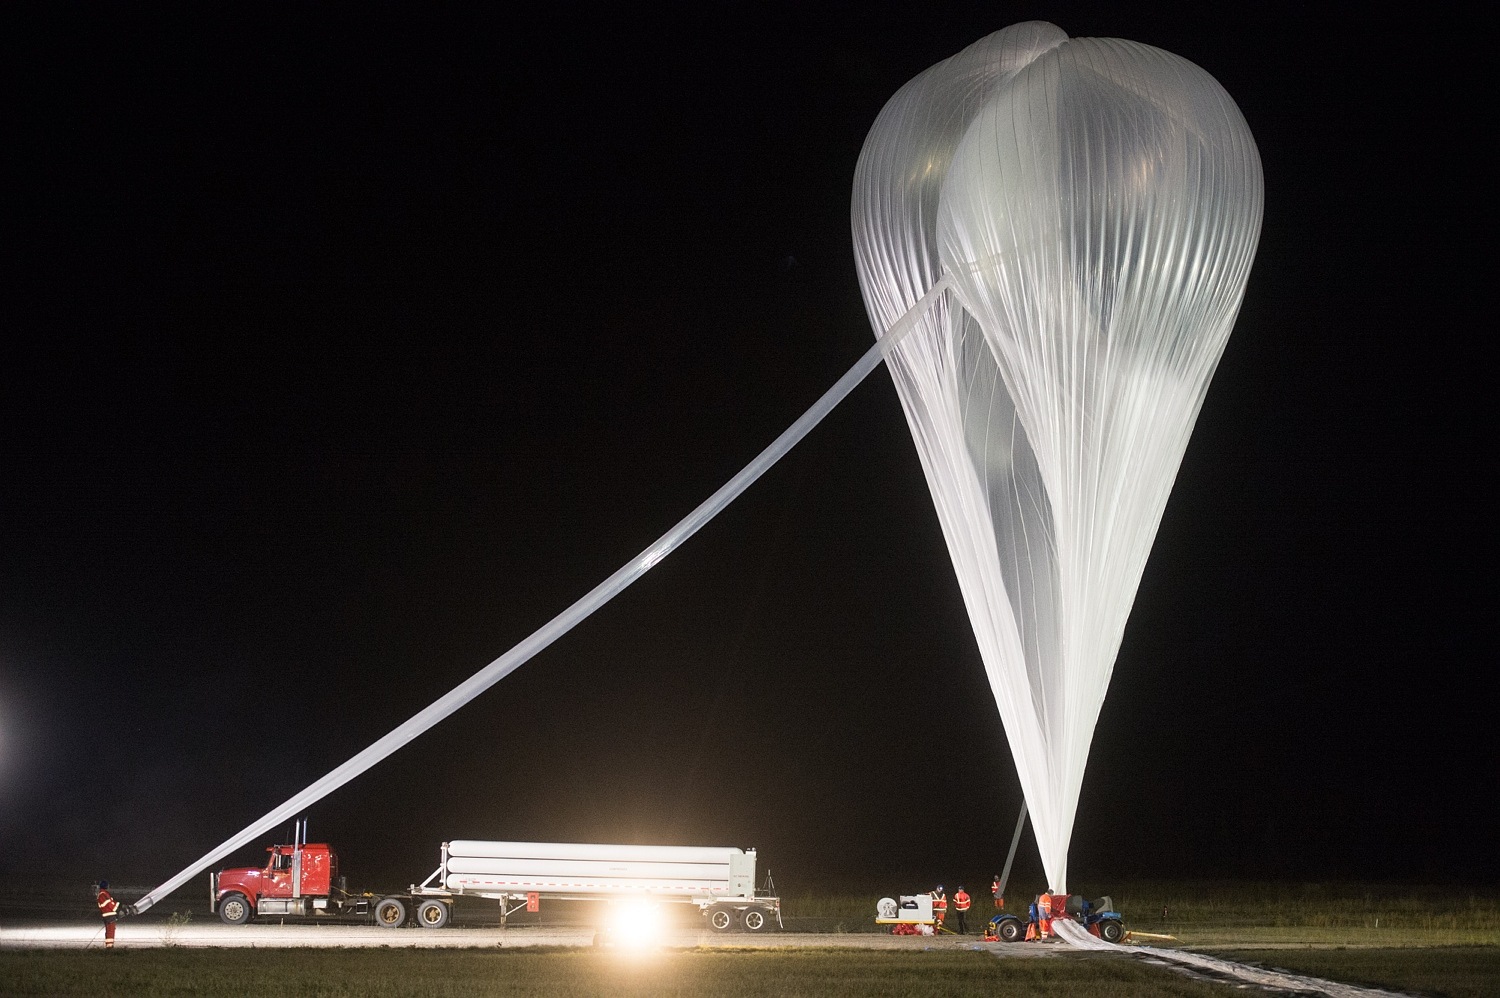 Inflating the Zodiac 402Z balloon (Image: CNES/GRIMAULT Emmanuel, 2015)